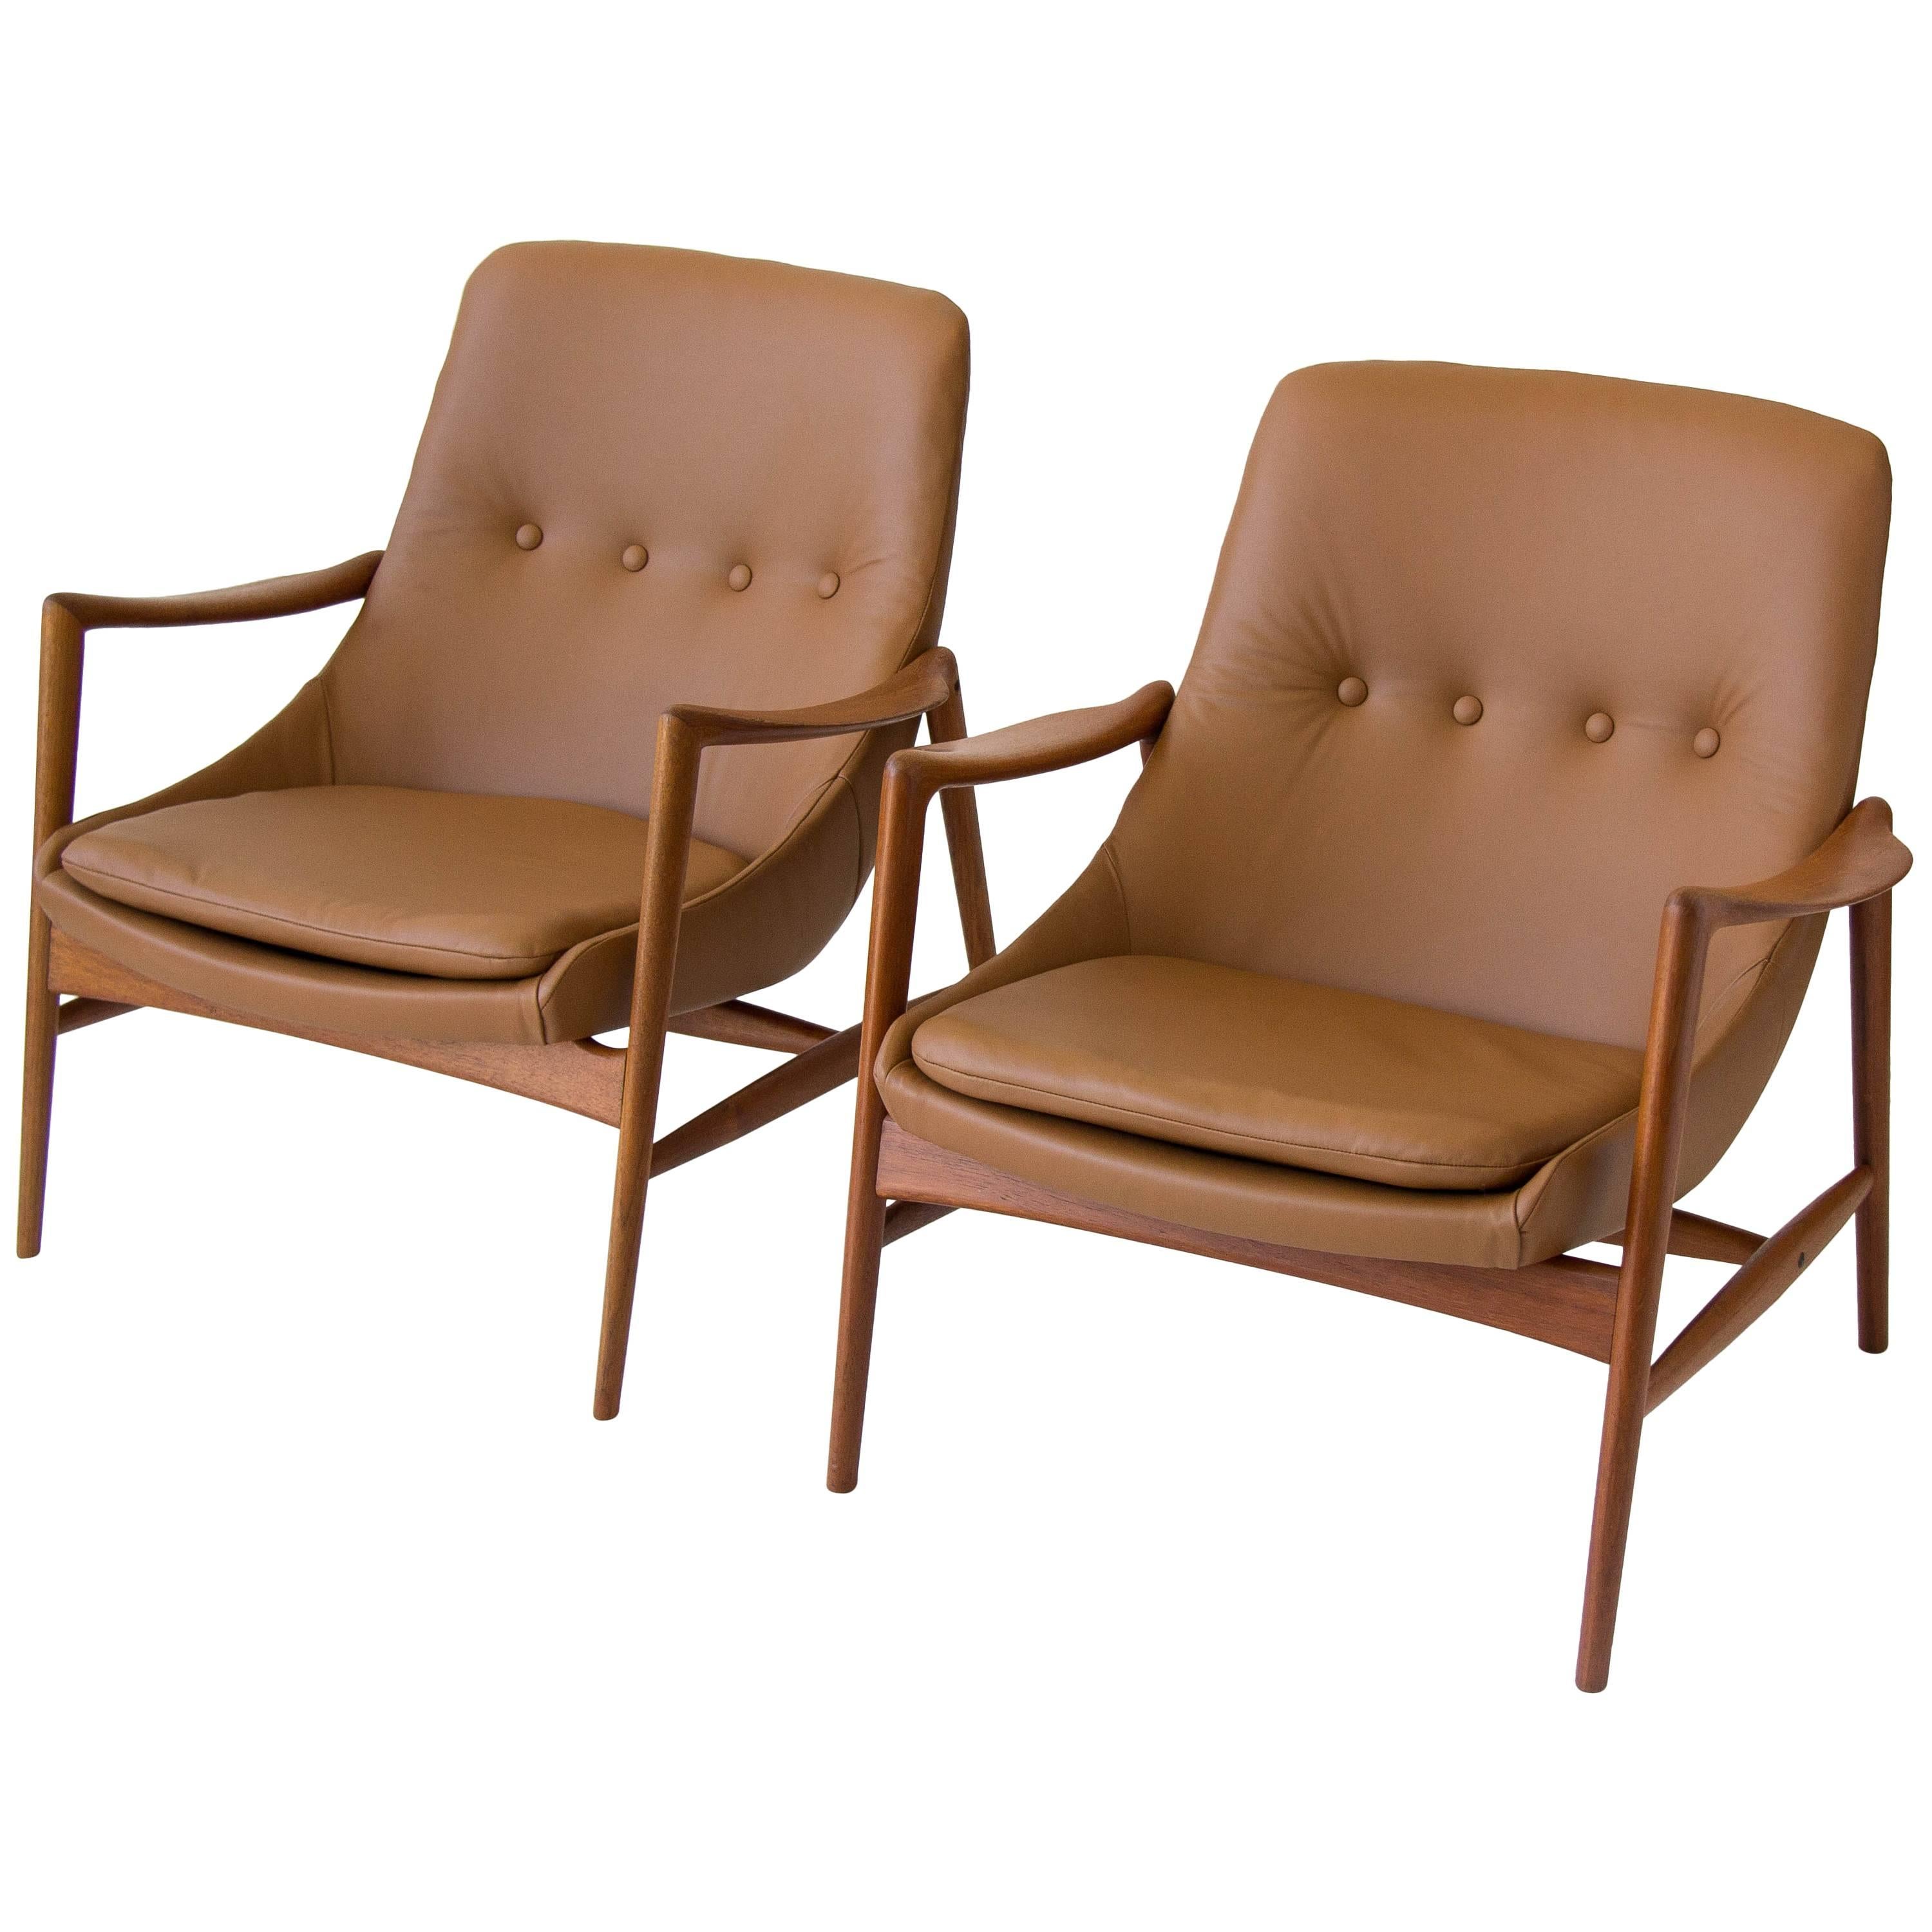 Pair of Norwegian Leather Lounge Chairs by Rastad & Relling